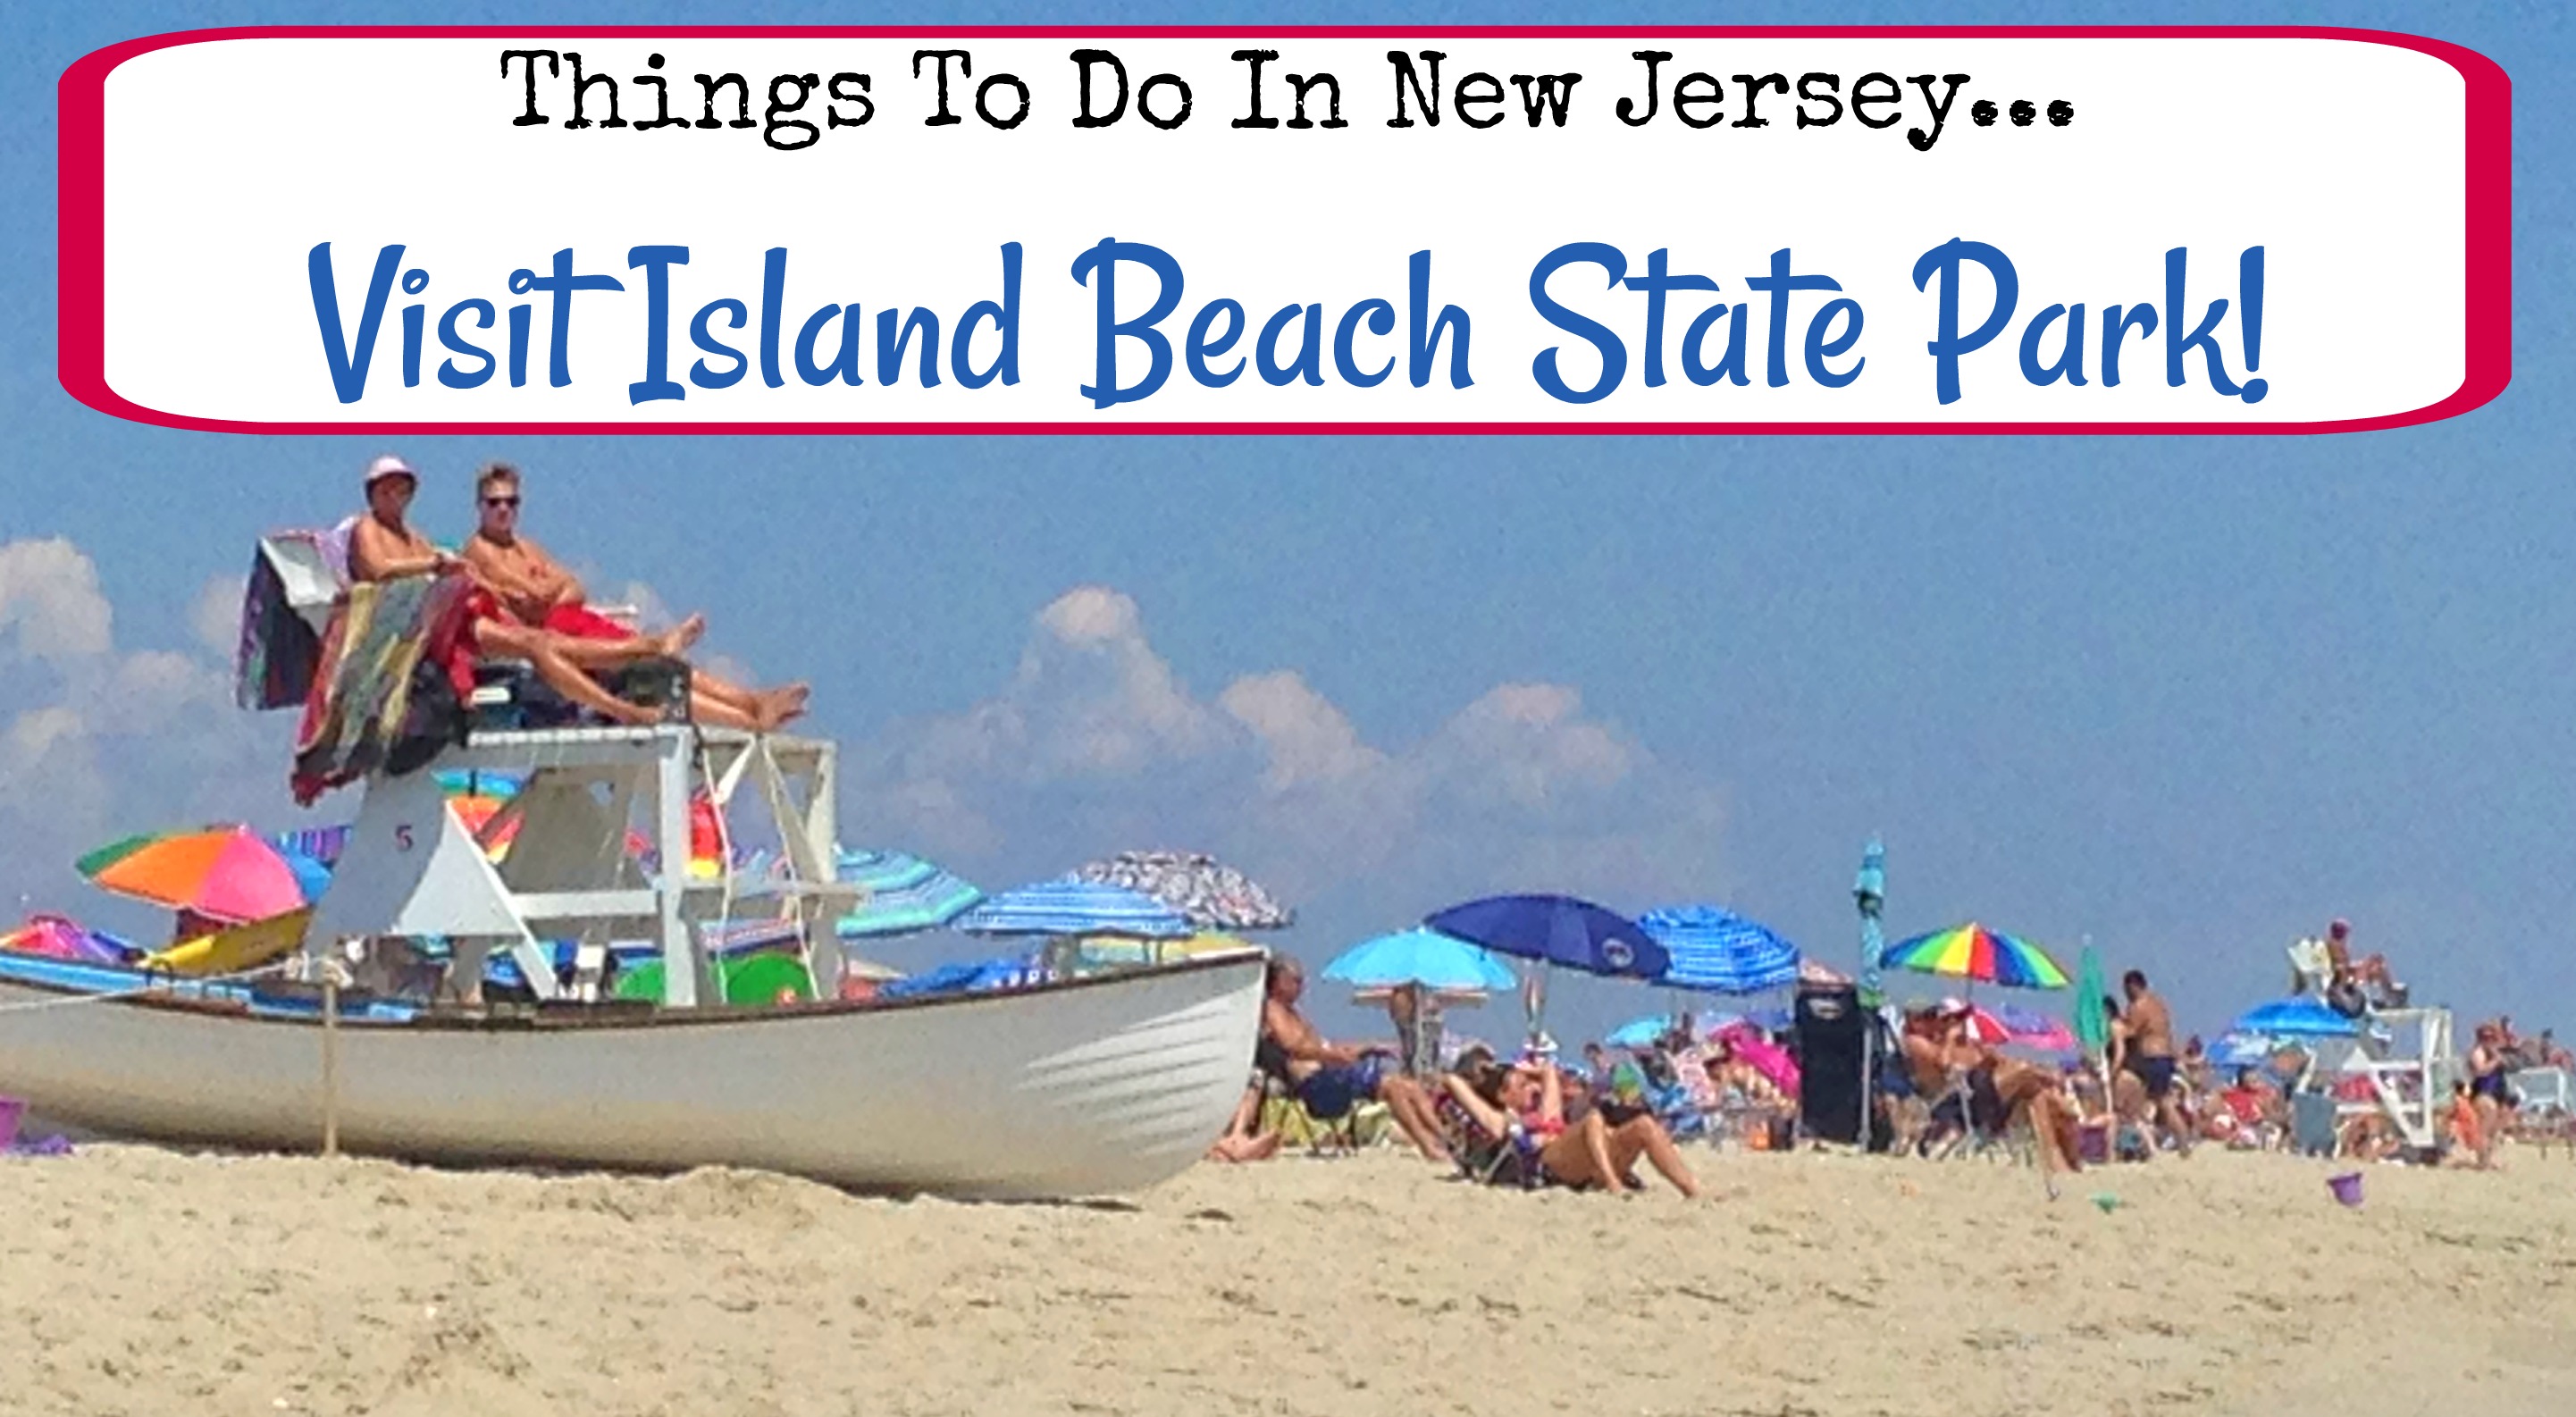 Visit Island Beach State Park! Things to Do In New Jersey